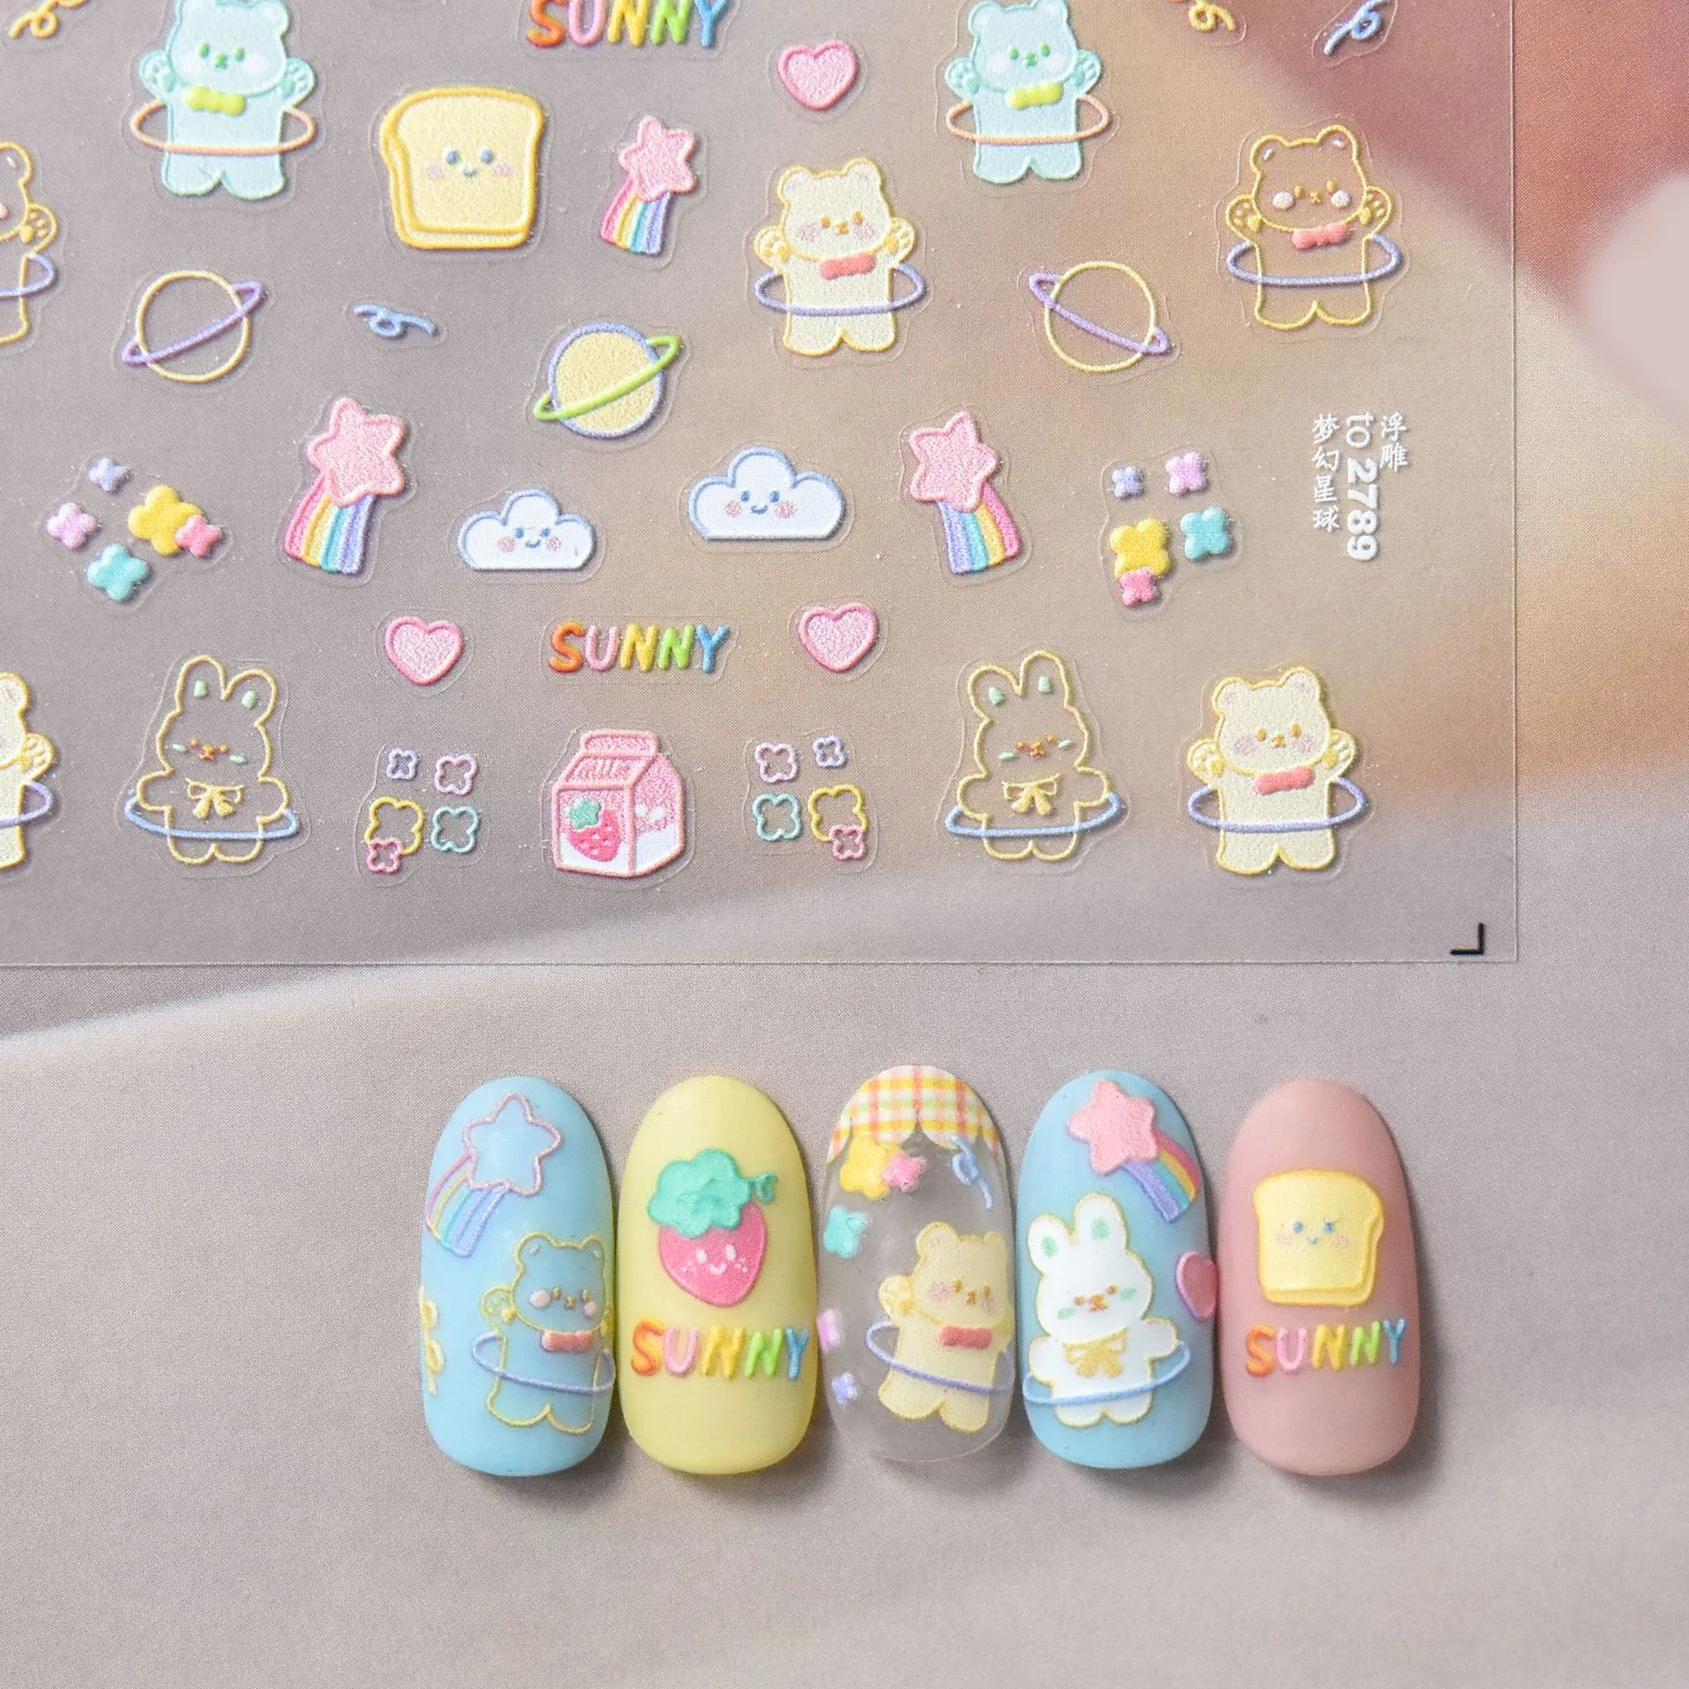 

Cute Bunny Bear Strawberry Planet Cartoon 5D Soft Embossed Reliefs Self Adhesive Nail Art Stickers Lovely 3D Manicure Decals